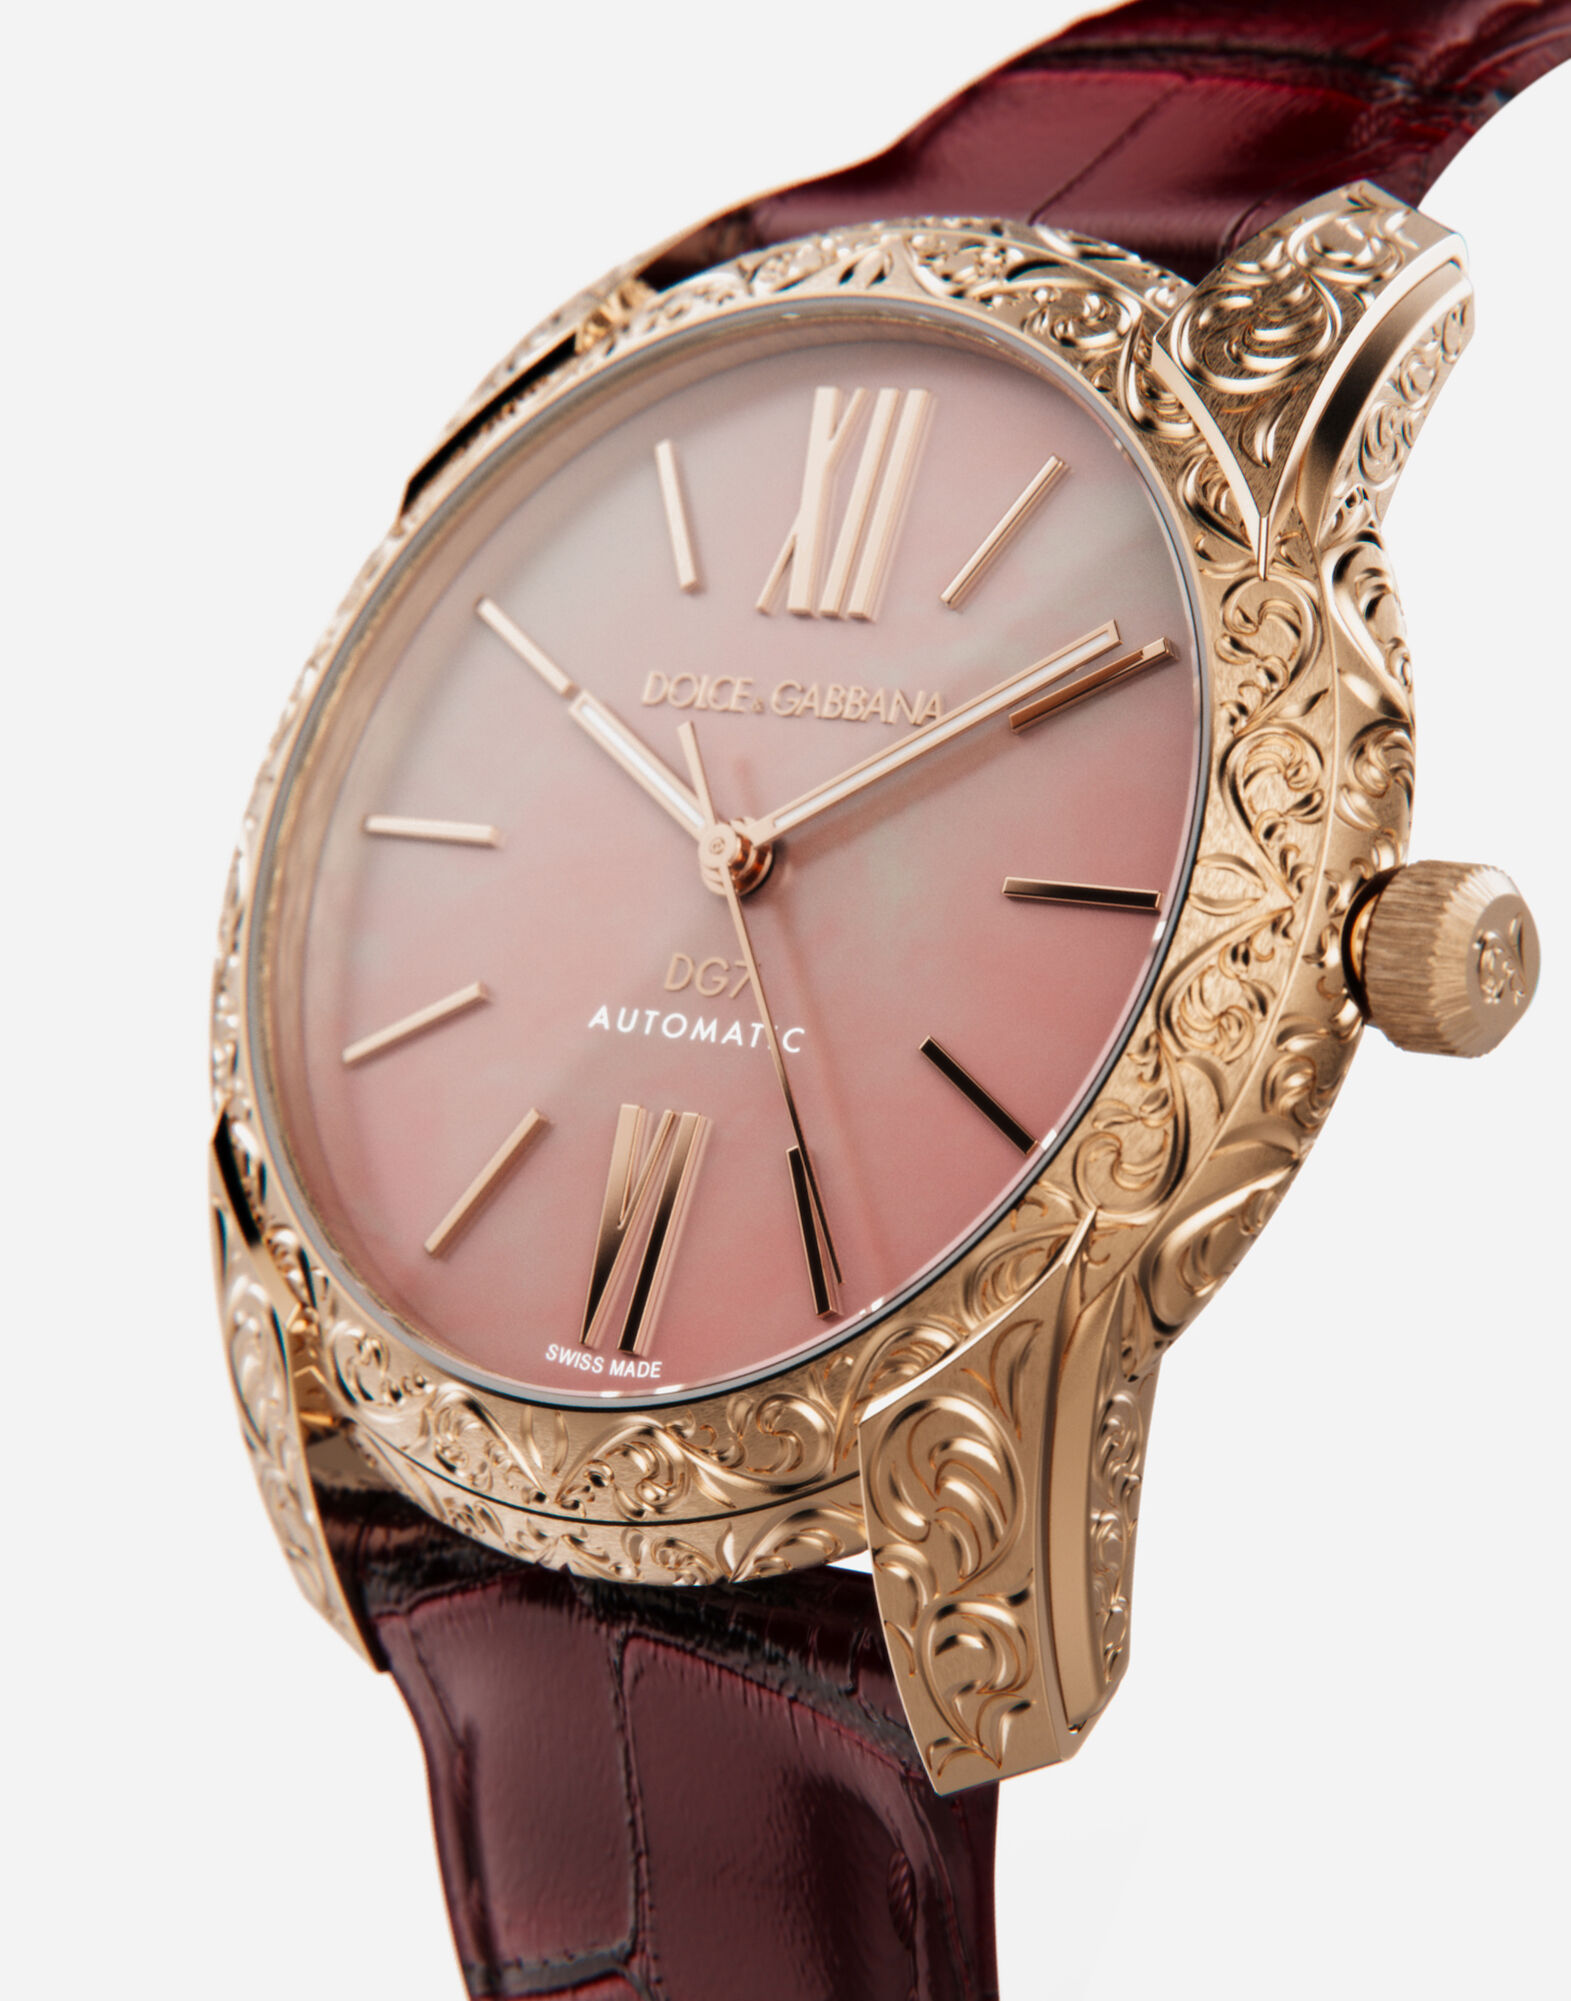 DG7 Gattopardo watch in red gold with pink mother of pearl in